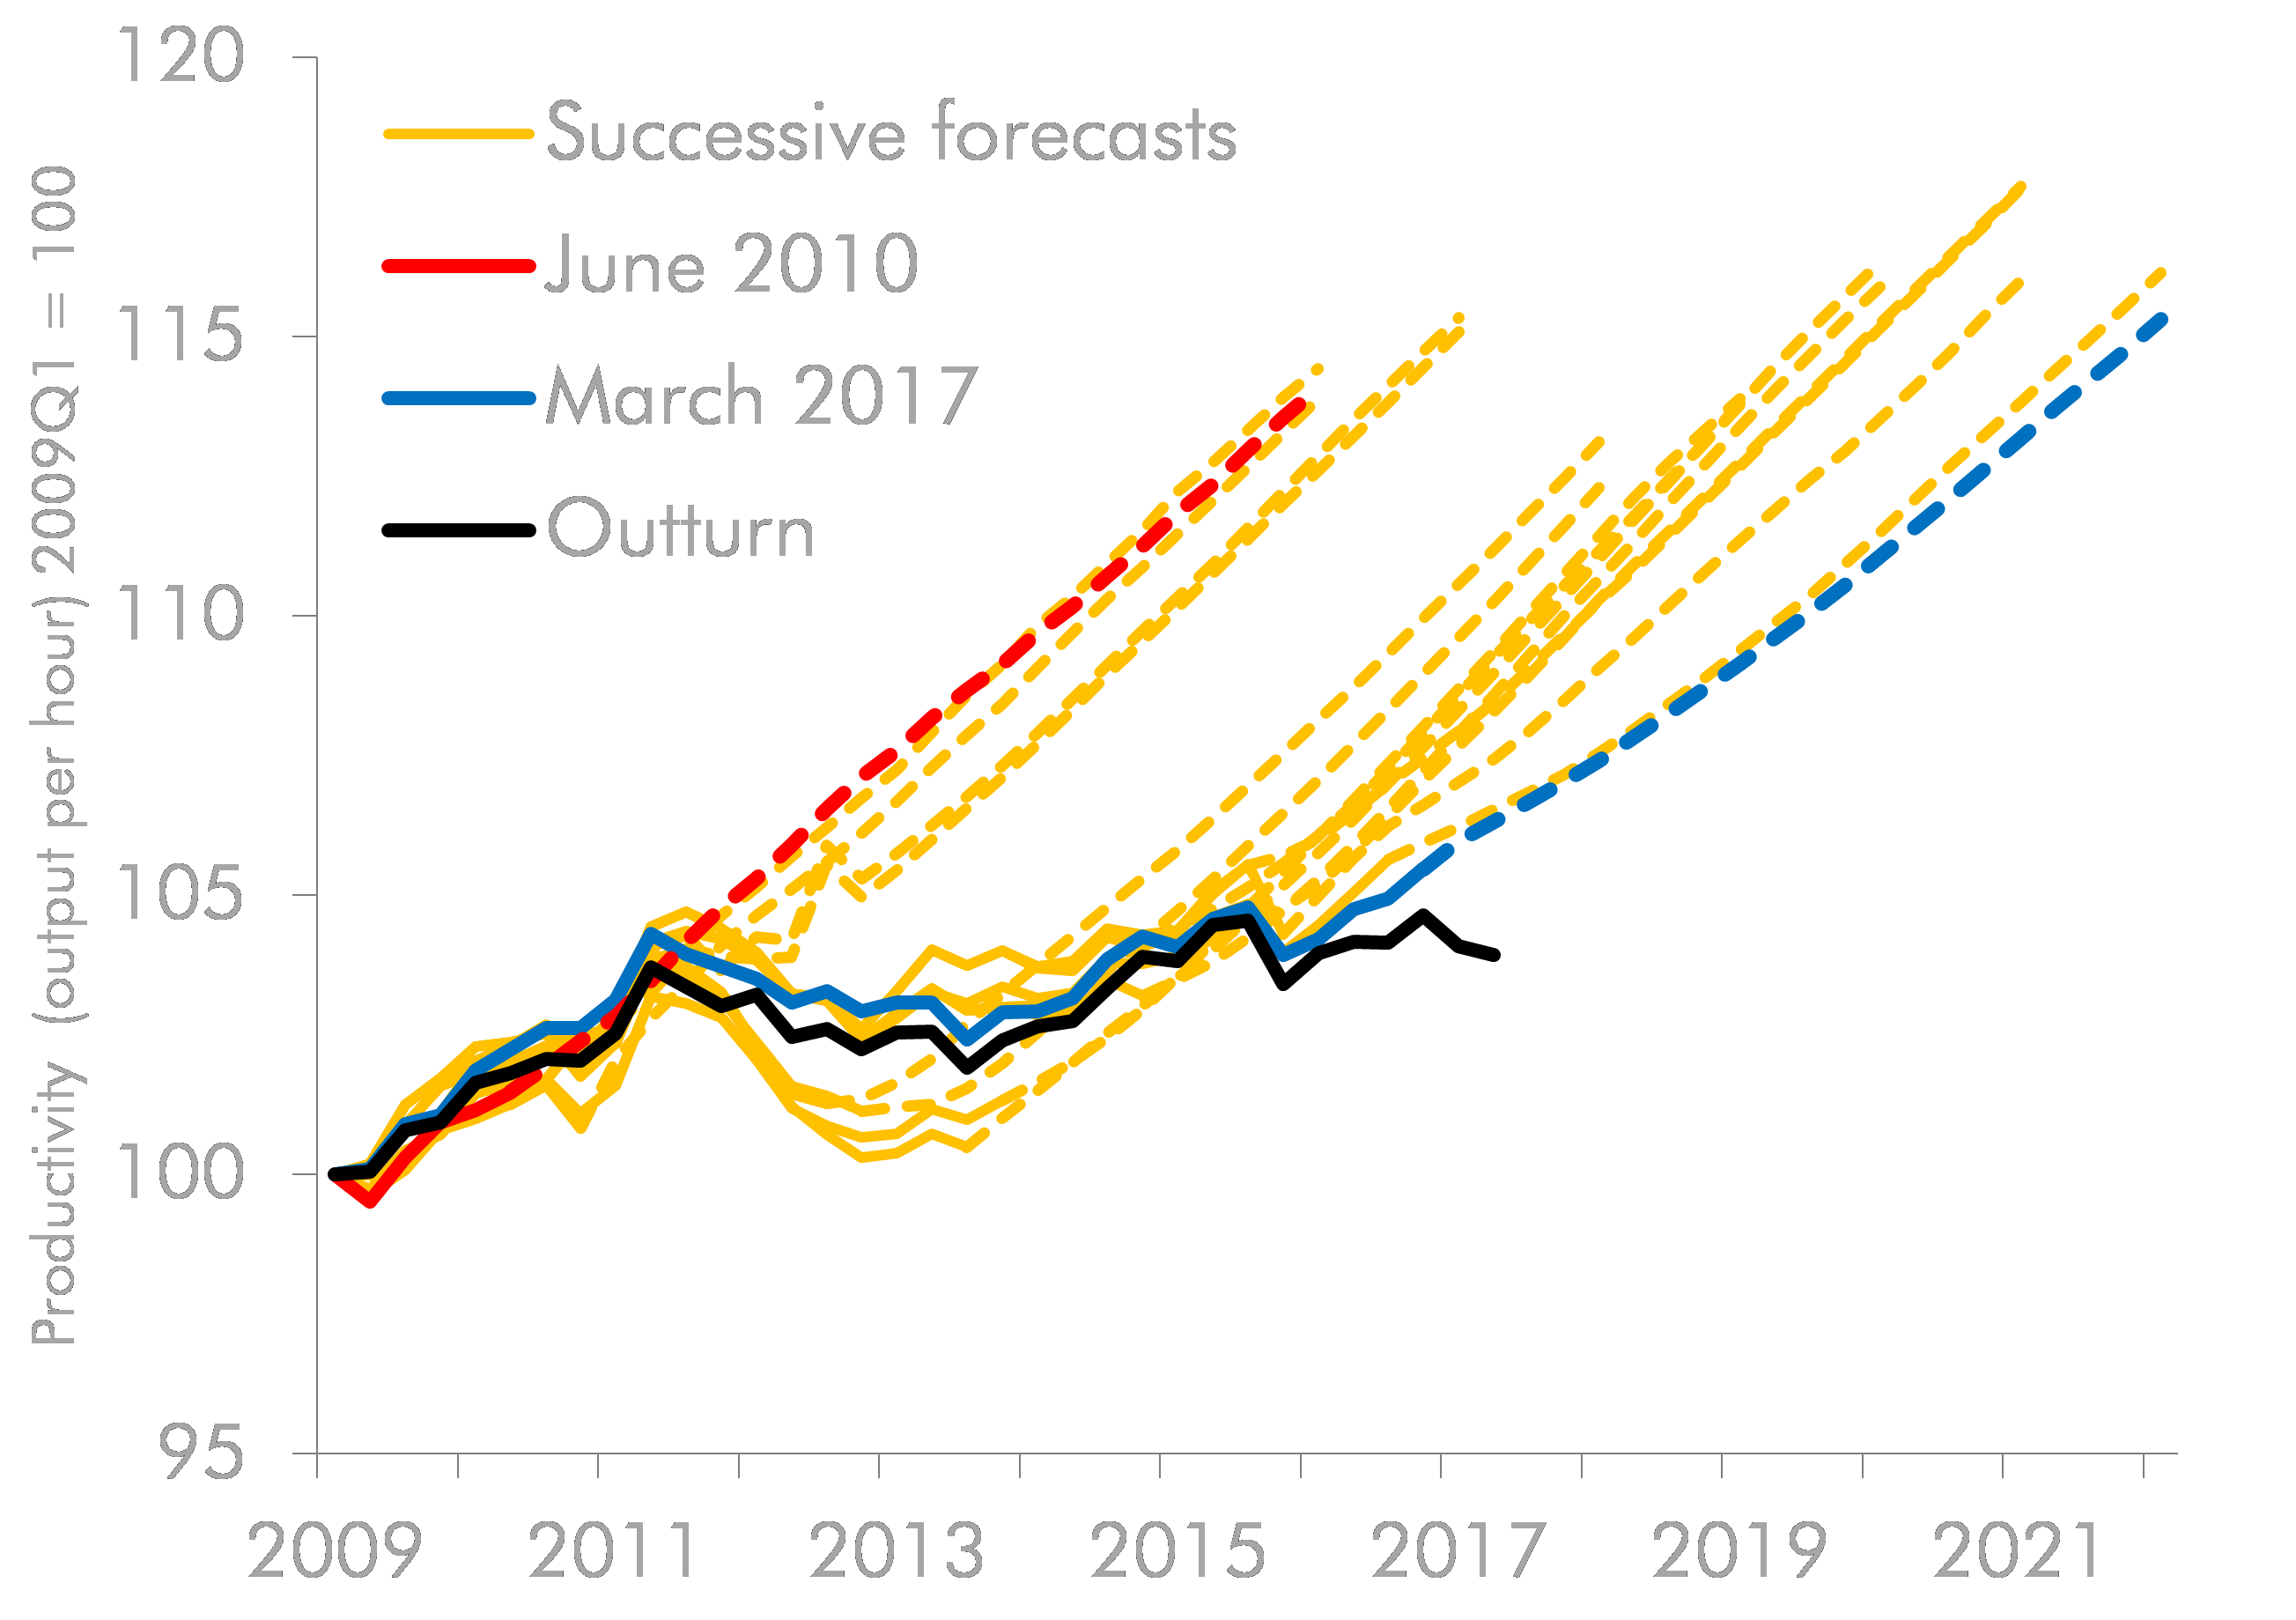 Line chart showing productivity forecasts